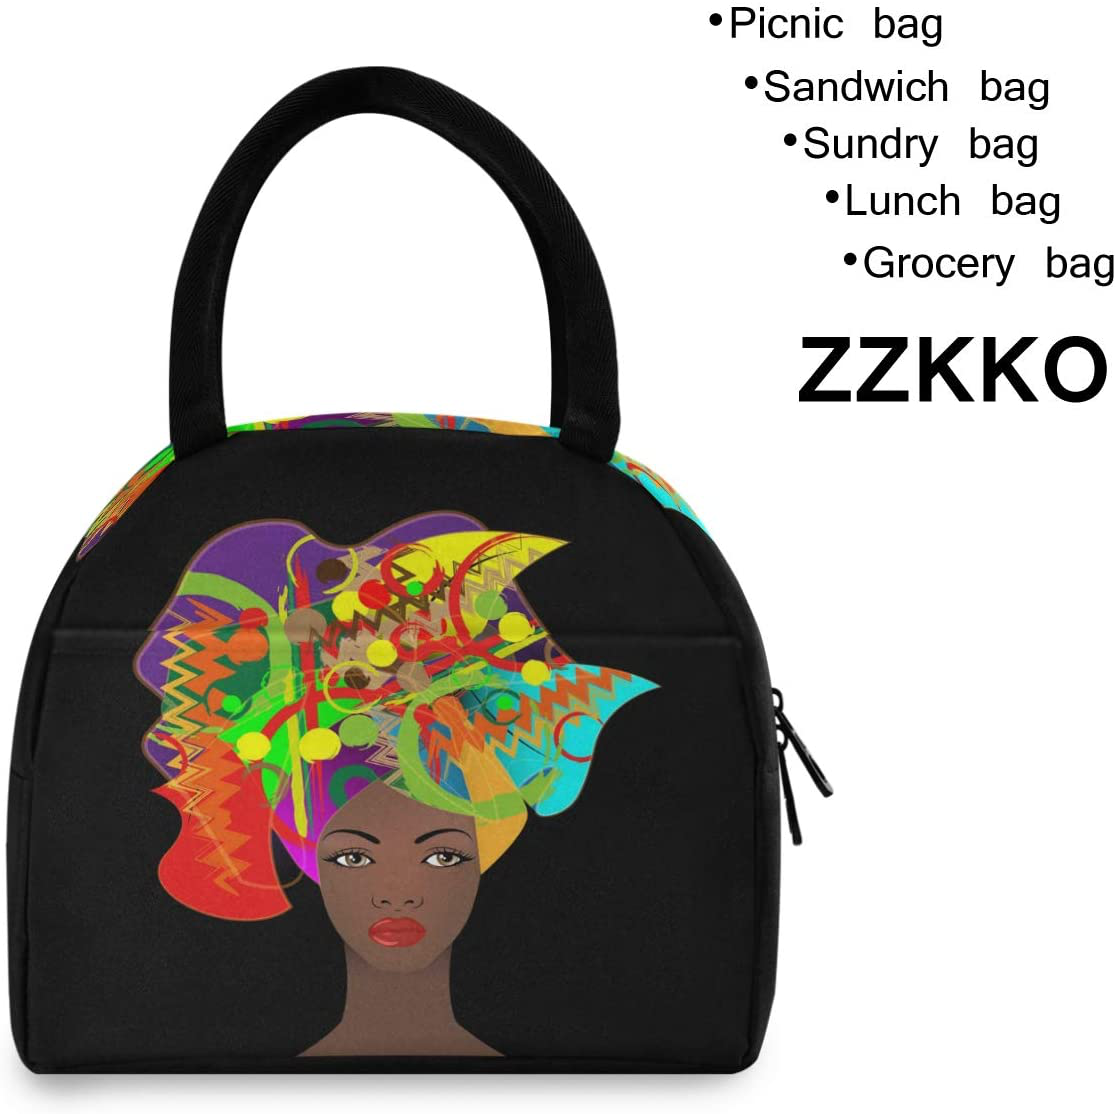 ZZKKO Floral Skull Lunch Bag Box Tote Organizer Lunch Container Insulated Zipper Meal Prep Cooler Handbag For Women Men Home School Office Outdoor Use